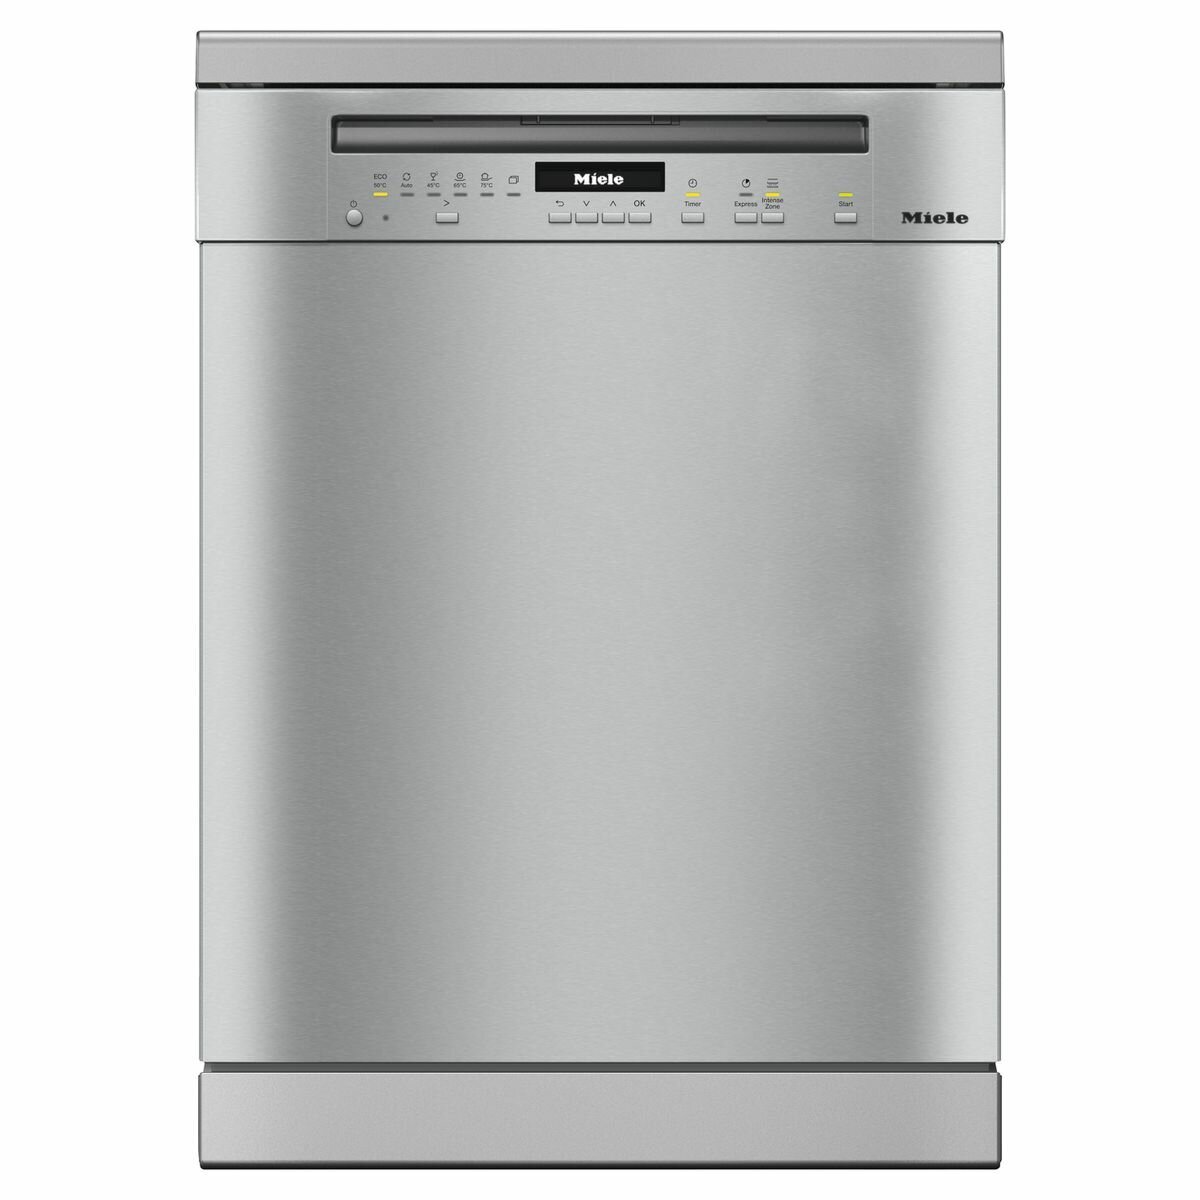 Commercial dishwashers from Miele